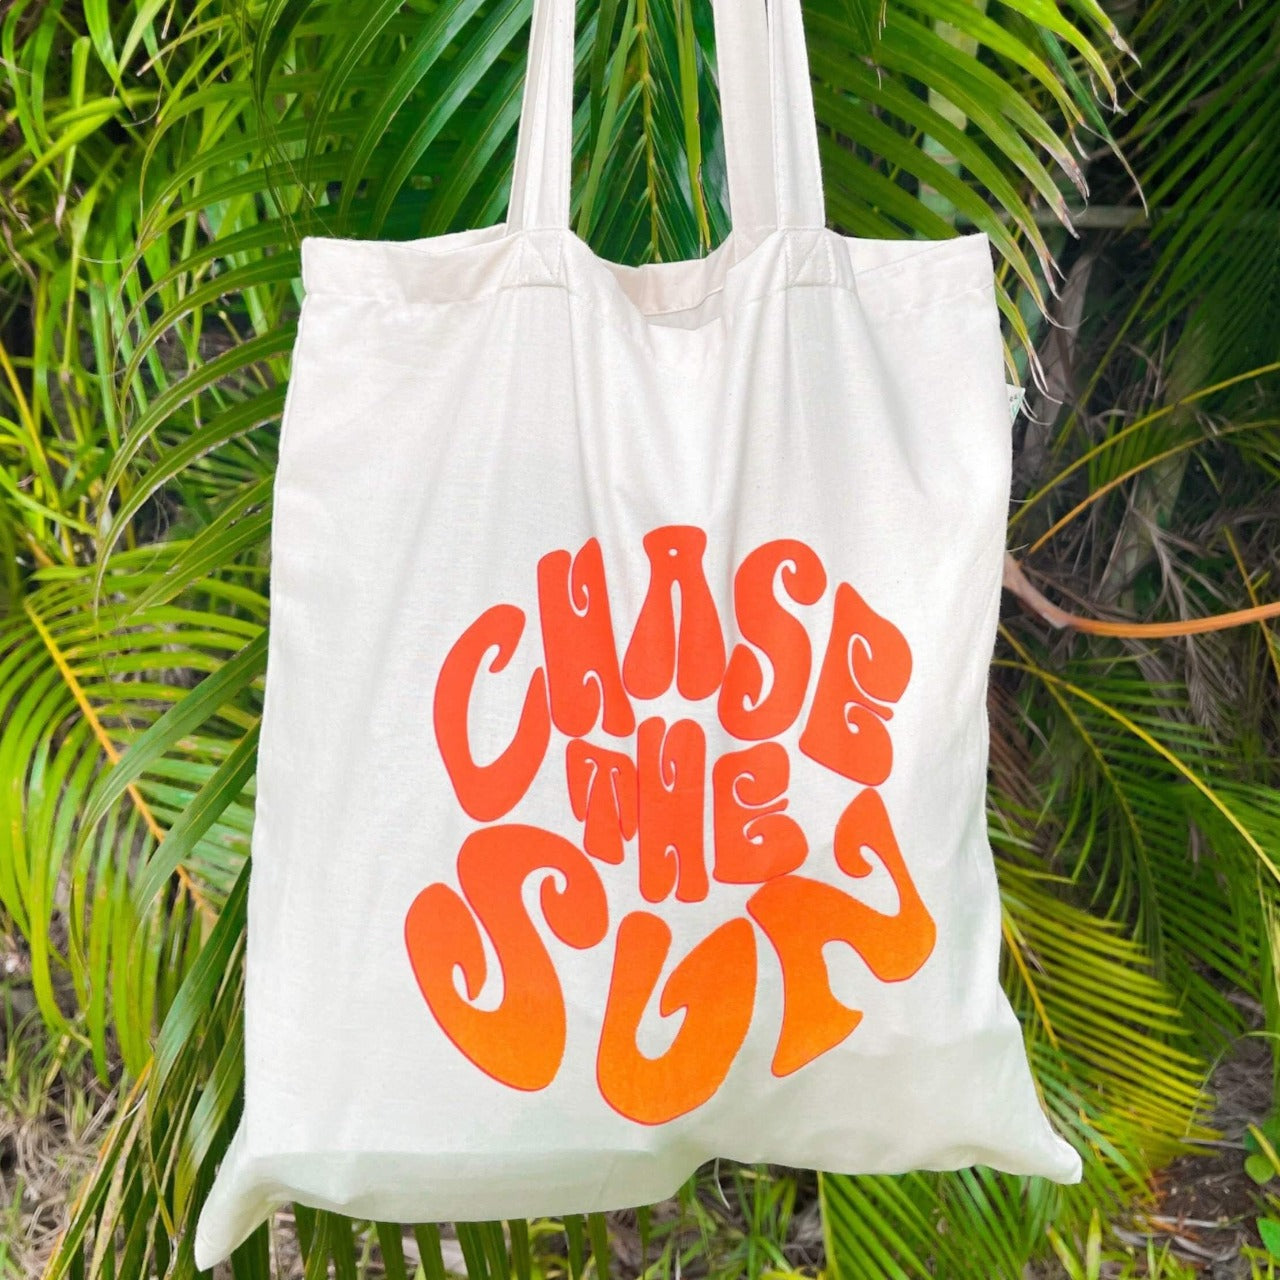 "Chase The Sun" canvas tote bag